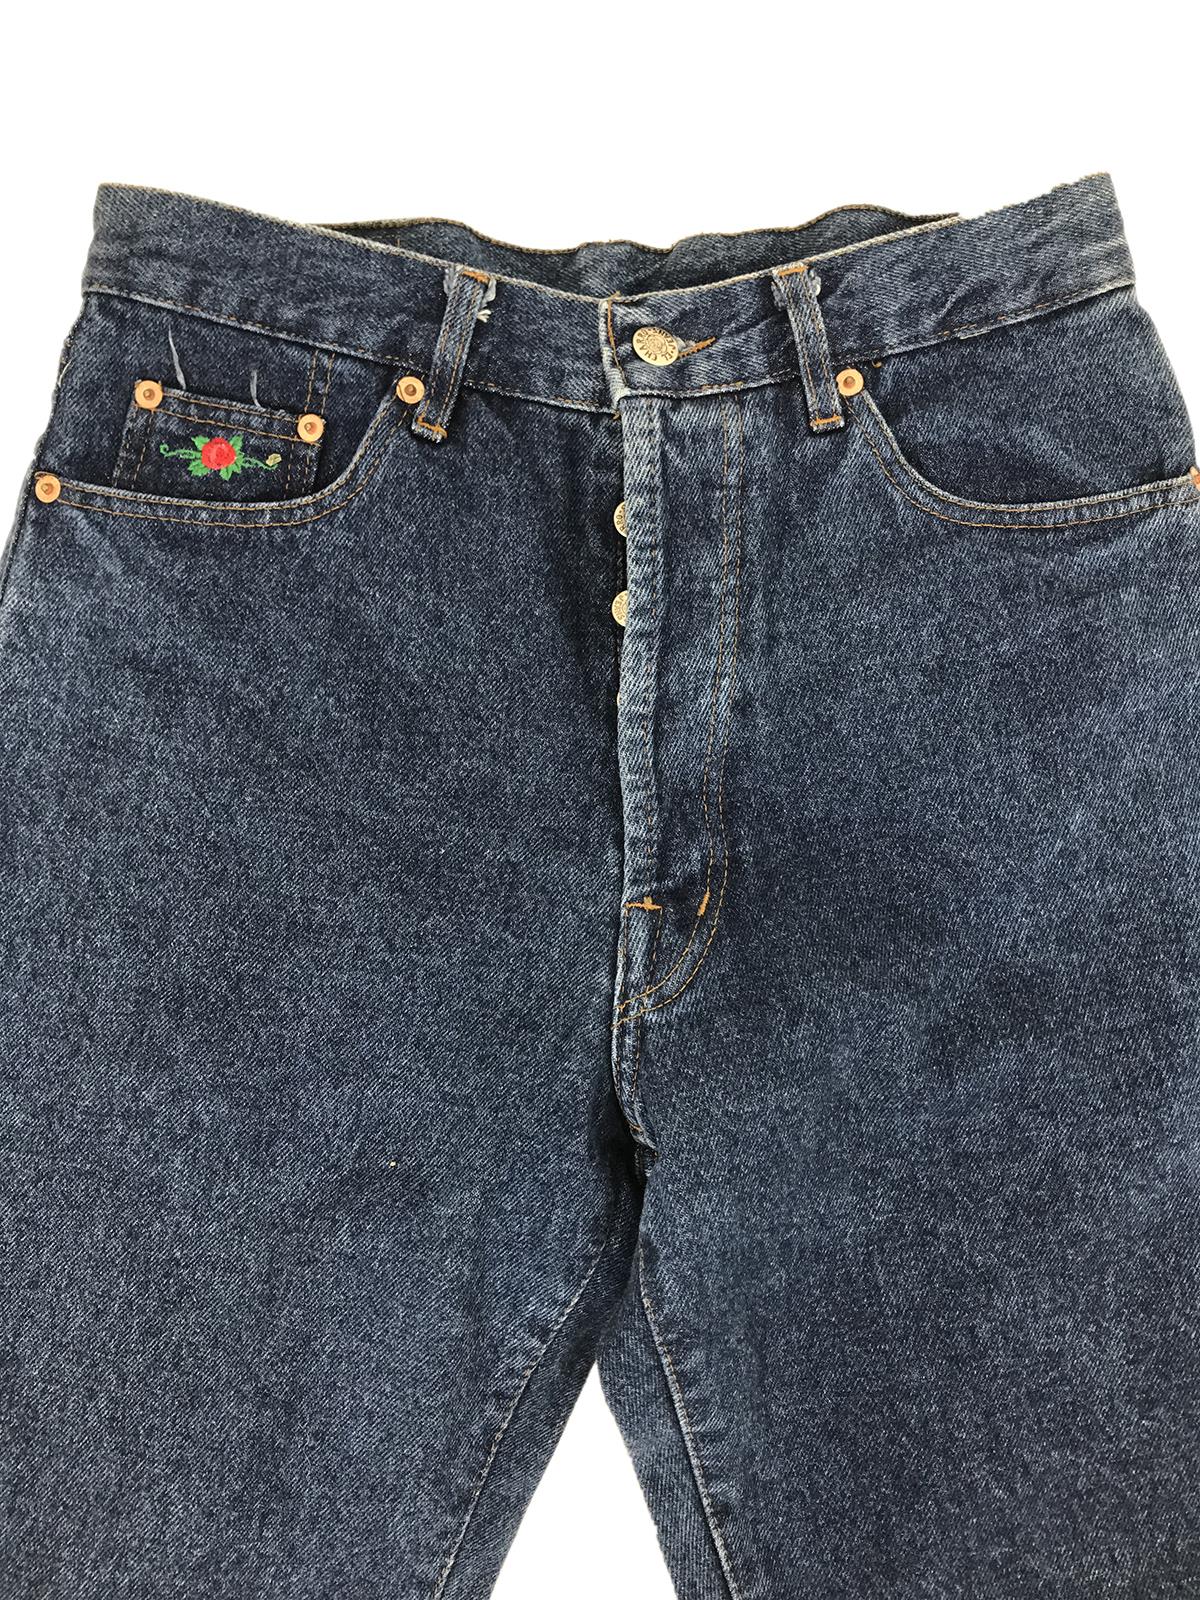 EL CHARRO Chicanos Jeans with Plush Lining